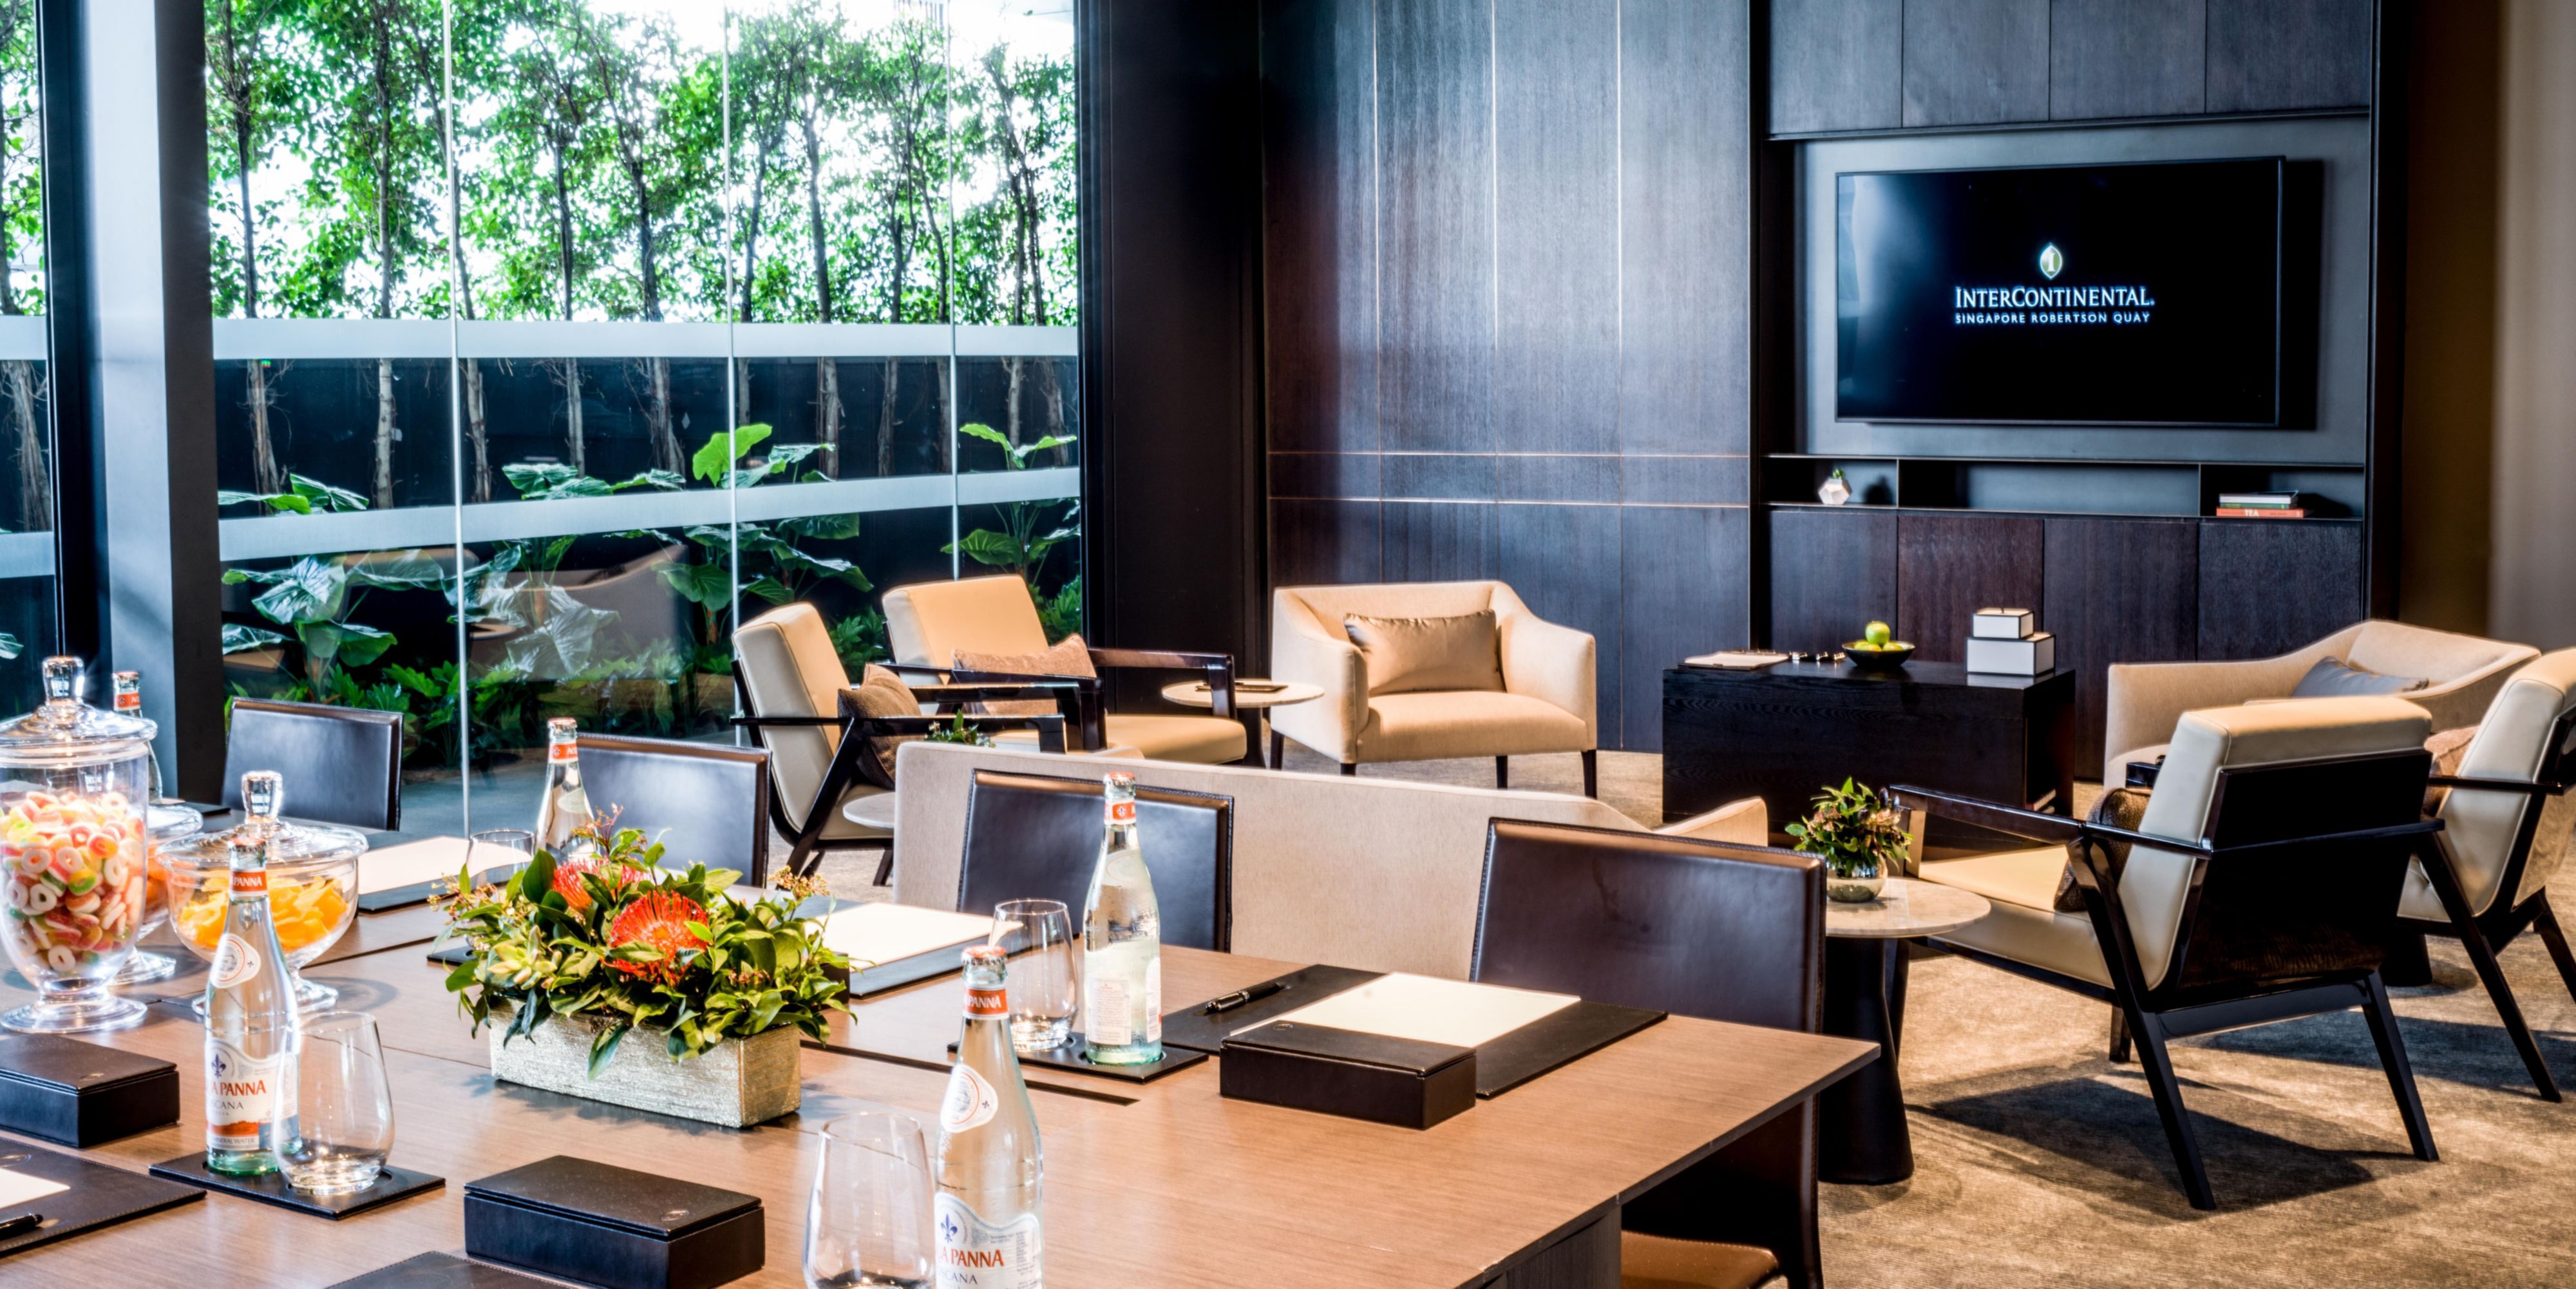 Located on level 4, The Residence is a stylish and professional meeting and event space surrounded by floor to ceiling glass windows that let in natural light as well as a lush, green garden terrace with state-of-the-art amenities and flexibility fro breakout sessions.